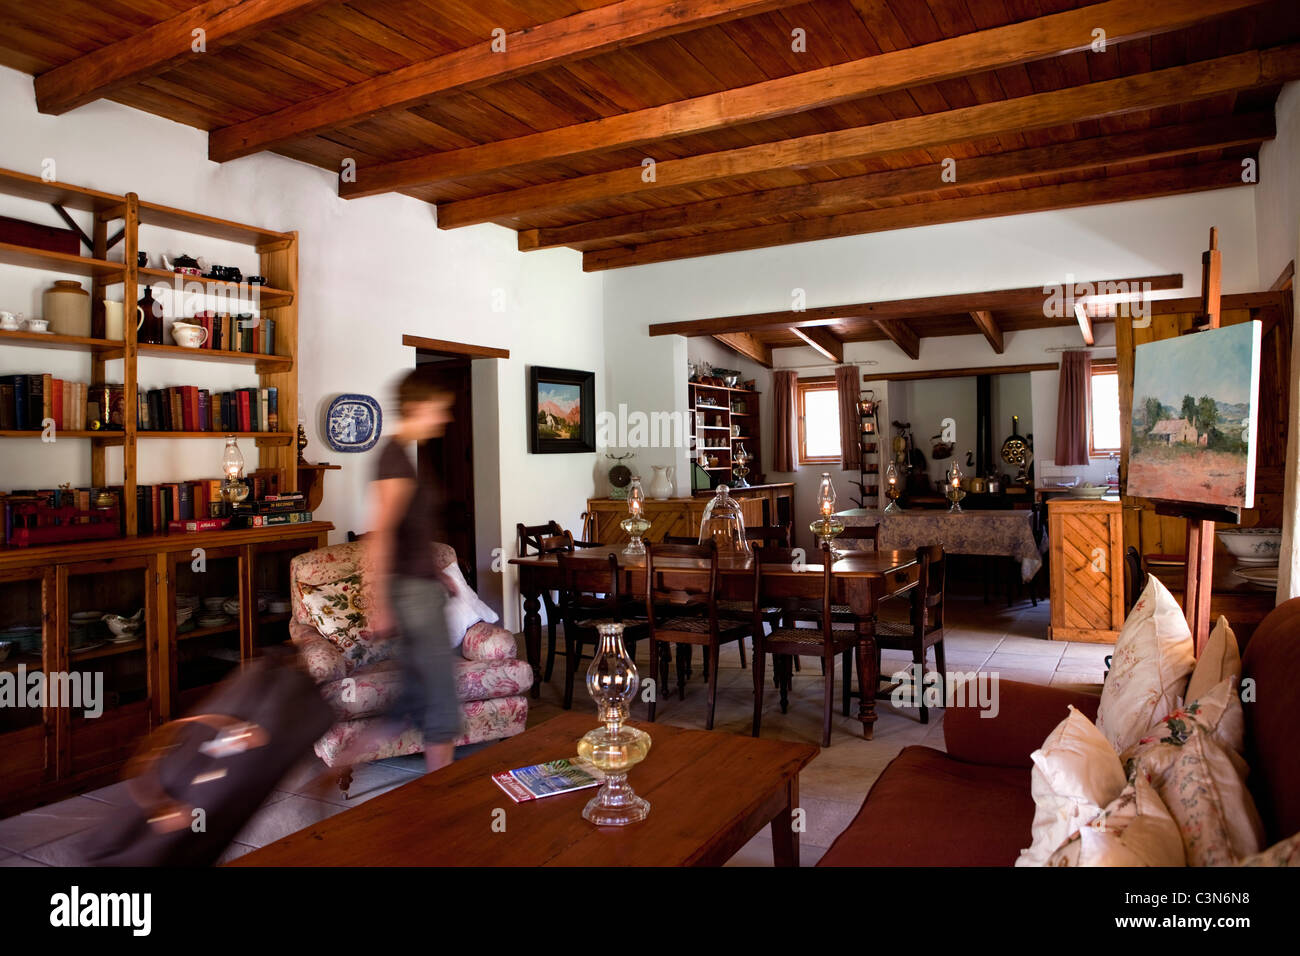 South Africa, Western Cape, Prince Albert, Guest farm Weltevrede. Guest entering living room with suitecase. Stock Photo